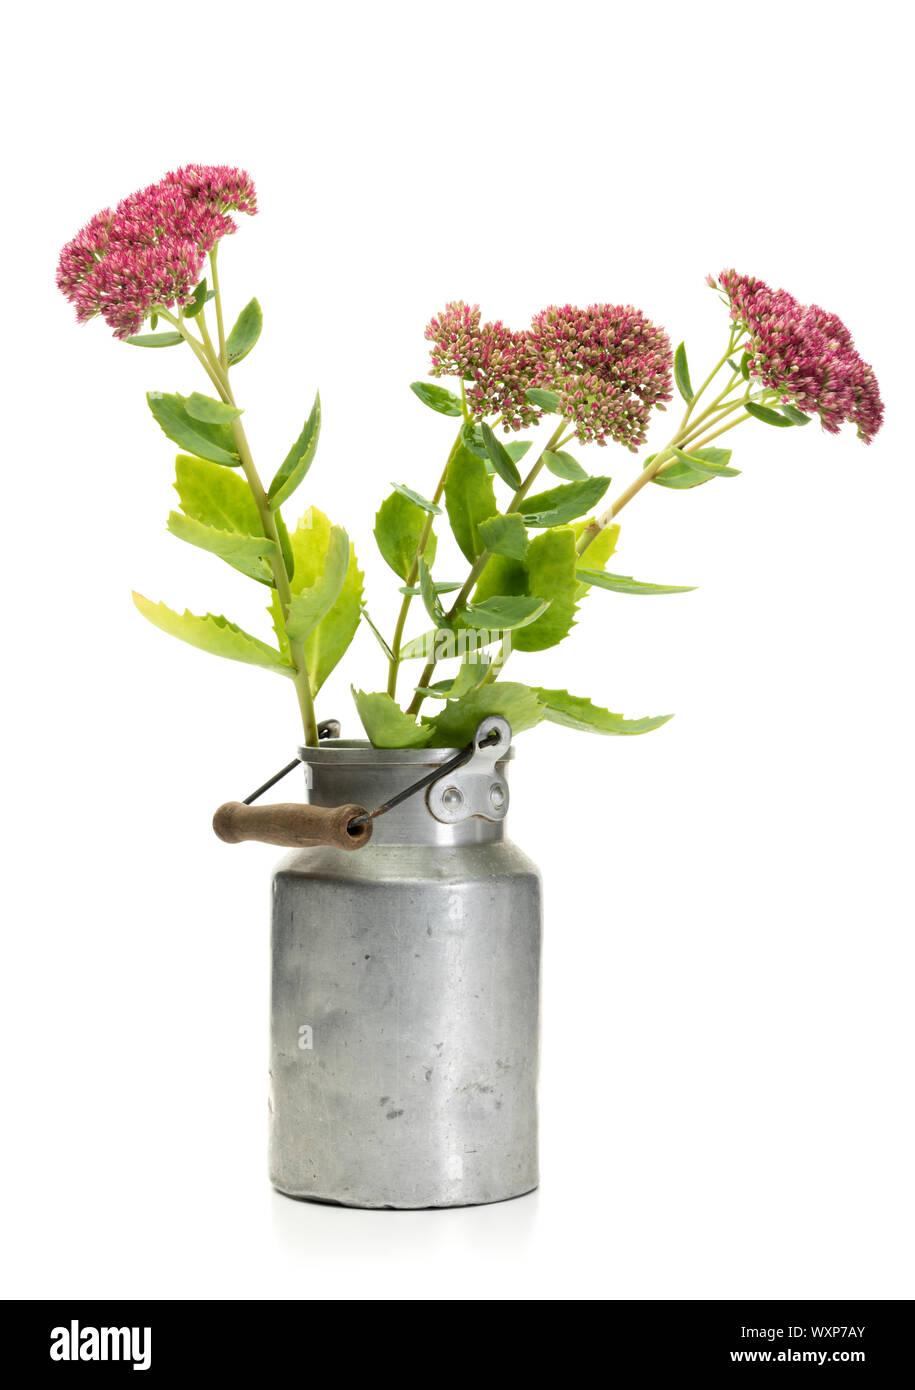 Hylotelephium spectabile flowers in old milk churn islated on white background Stock Photo